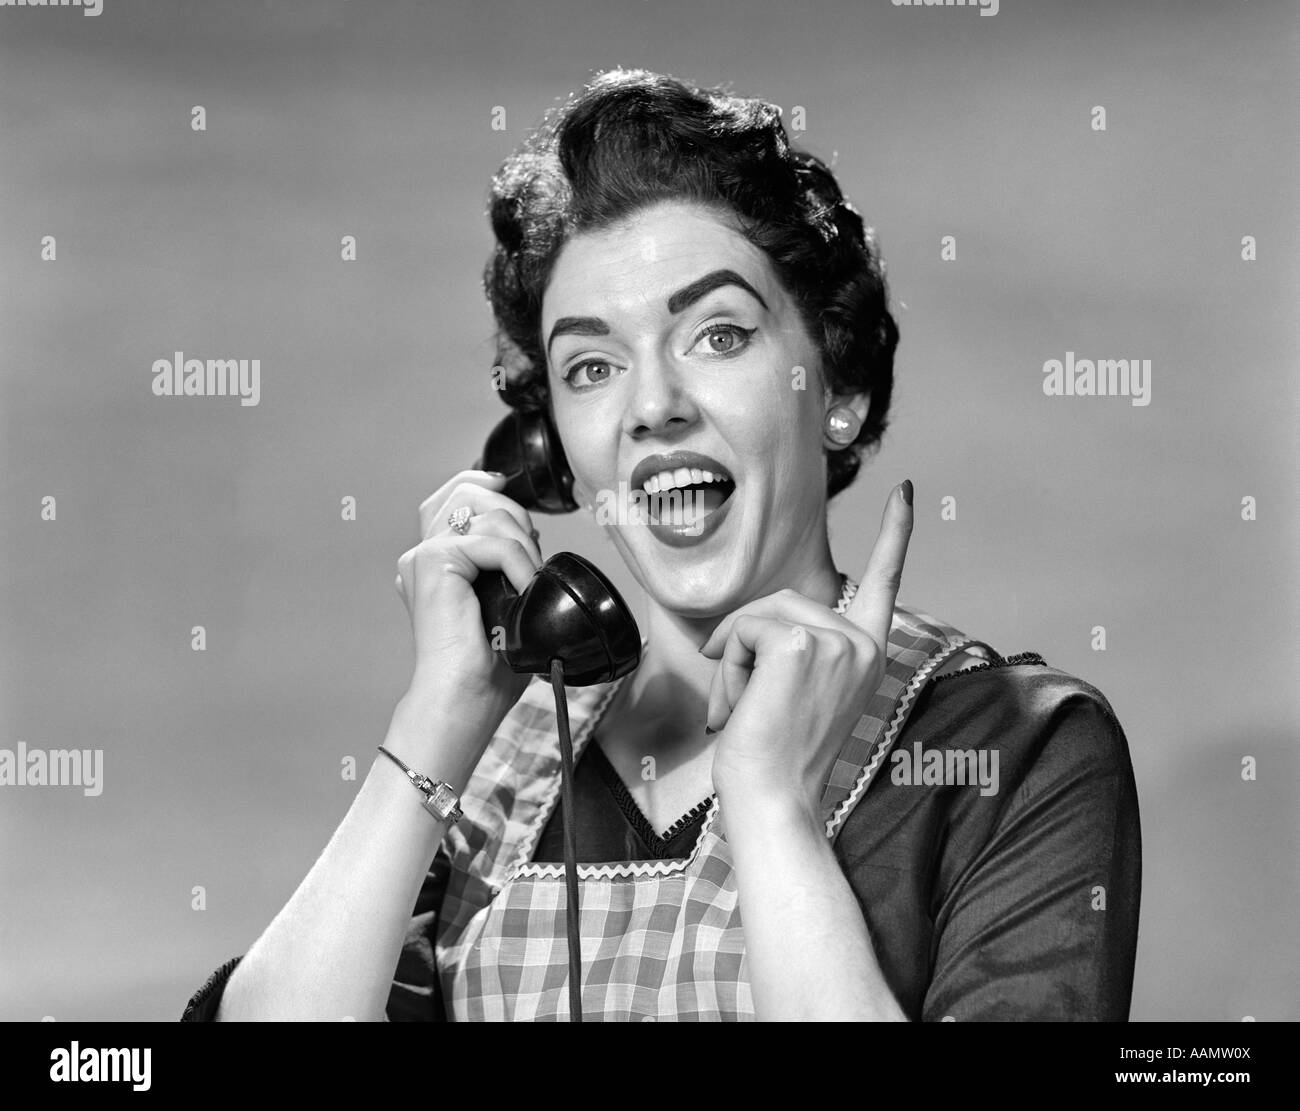 1950s WOMAN IN APRON TALKING ON TELEPHONE POINTING FINGER LOOKING AT CAMERA Stock Photo